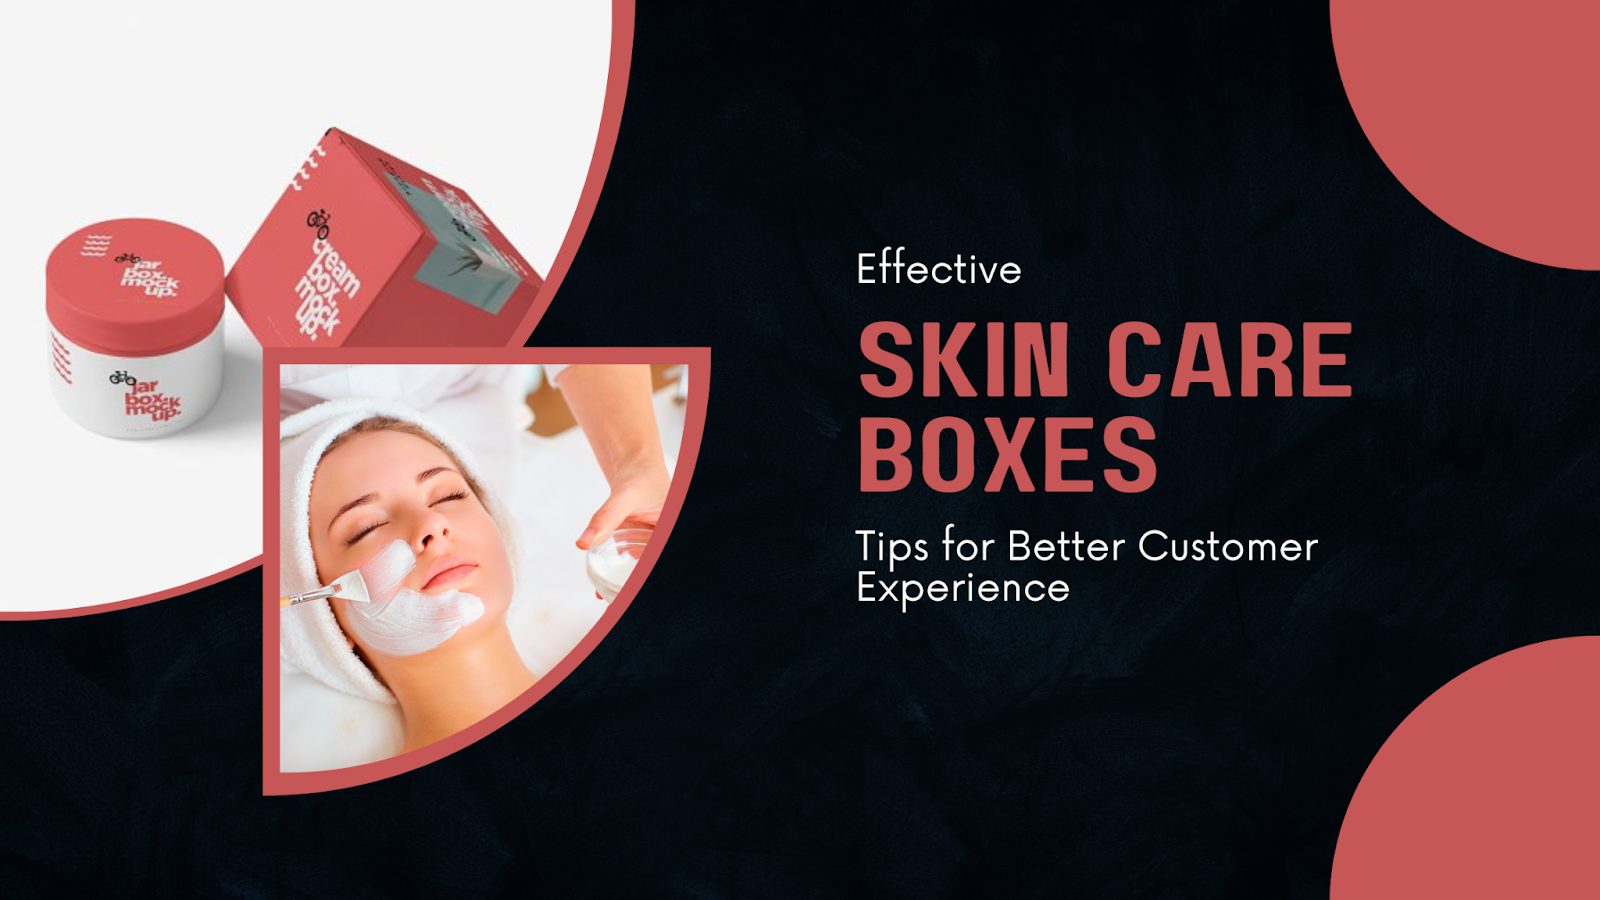 Effective Skin Care Boxes Tips for Better Customer Experience